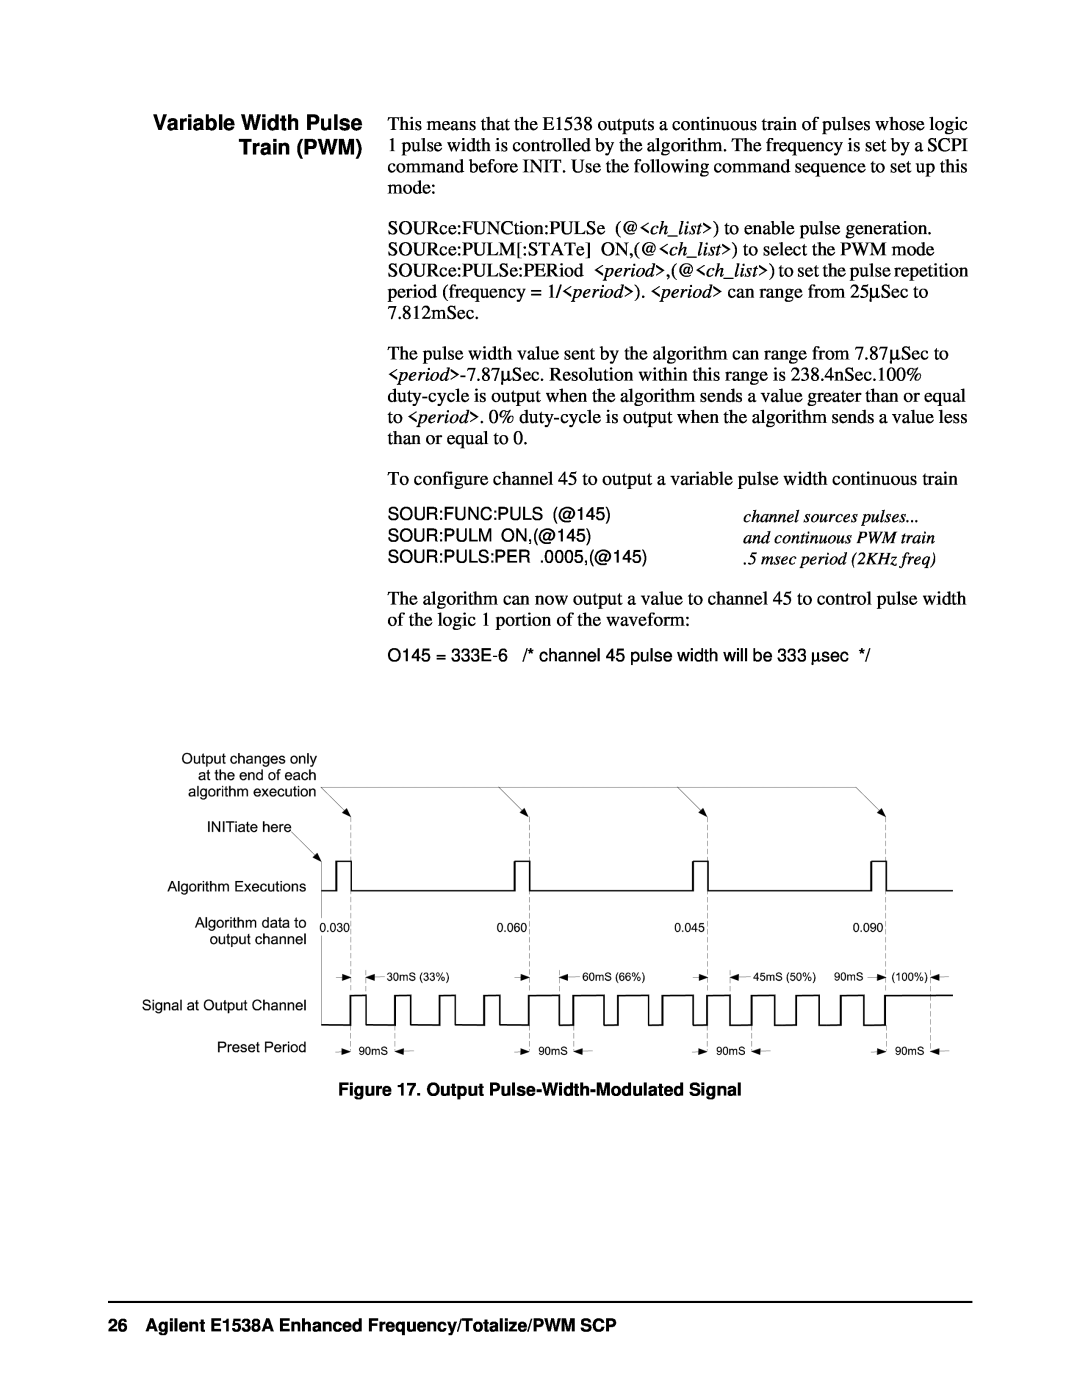 VXI VT1538A user manual Variable Width Pulse Train PWM, Output Pulse-Width-Modulated Signal 